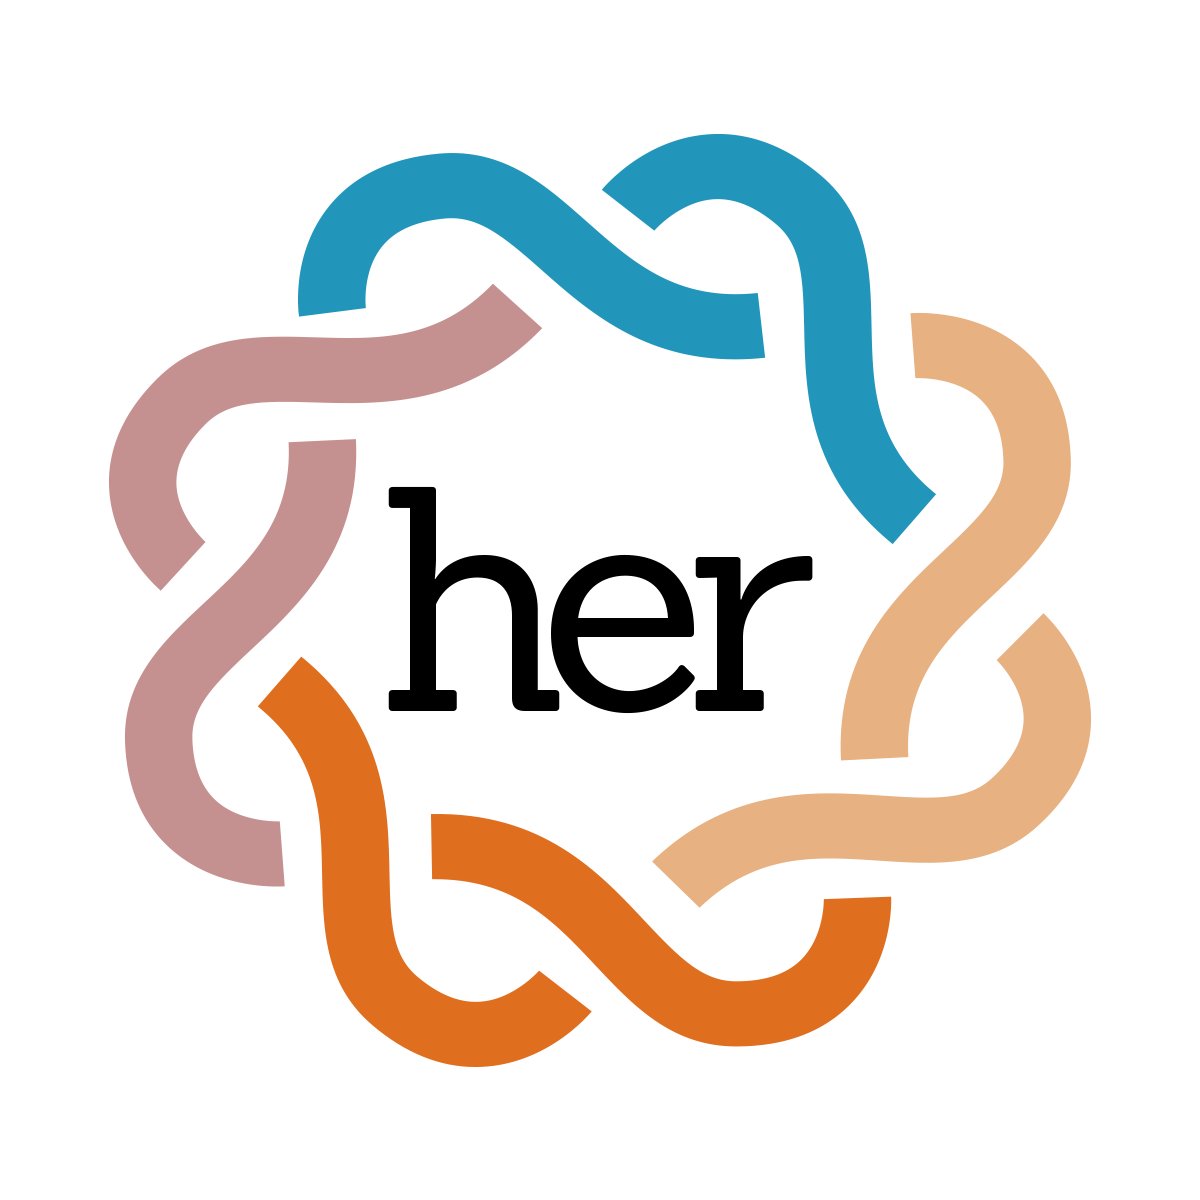 The Herstory Project aims to and expand upon the American narrative and include women's history right where it belongs- at the forefront.